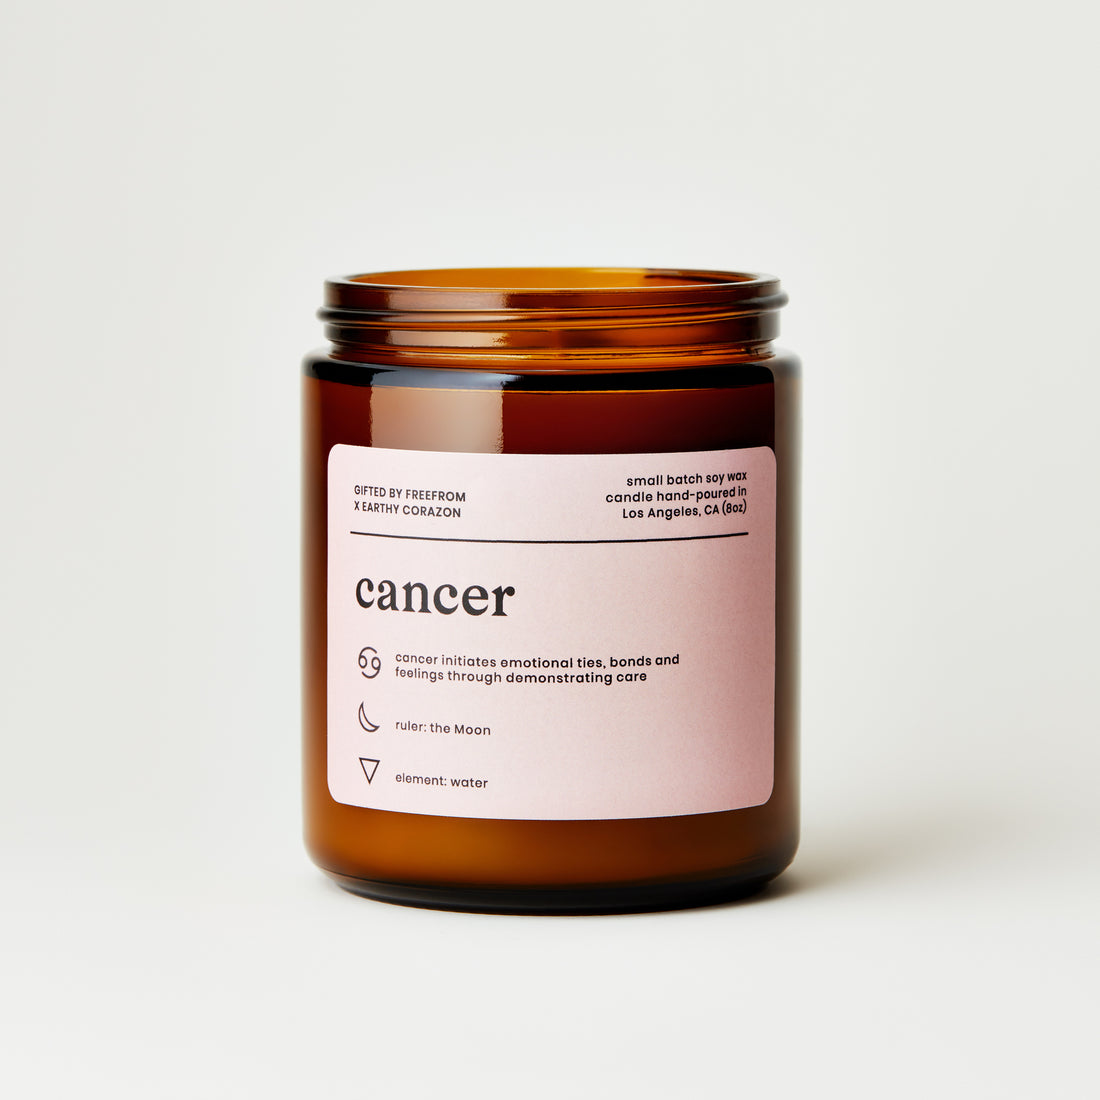 Cancer Box by GIFTED